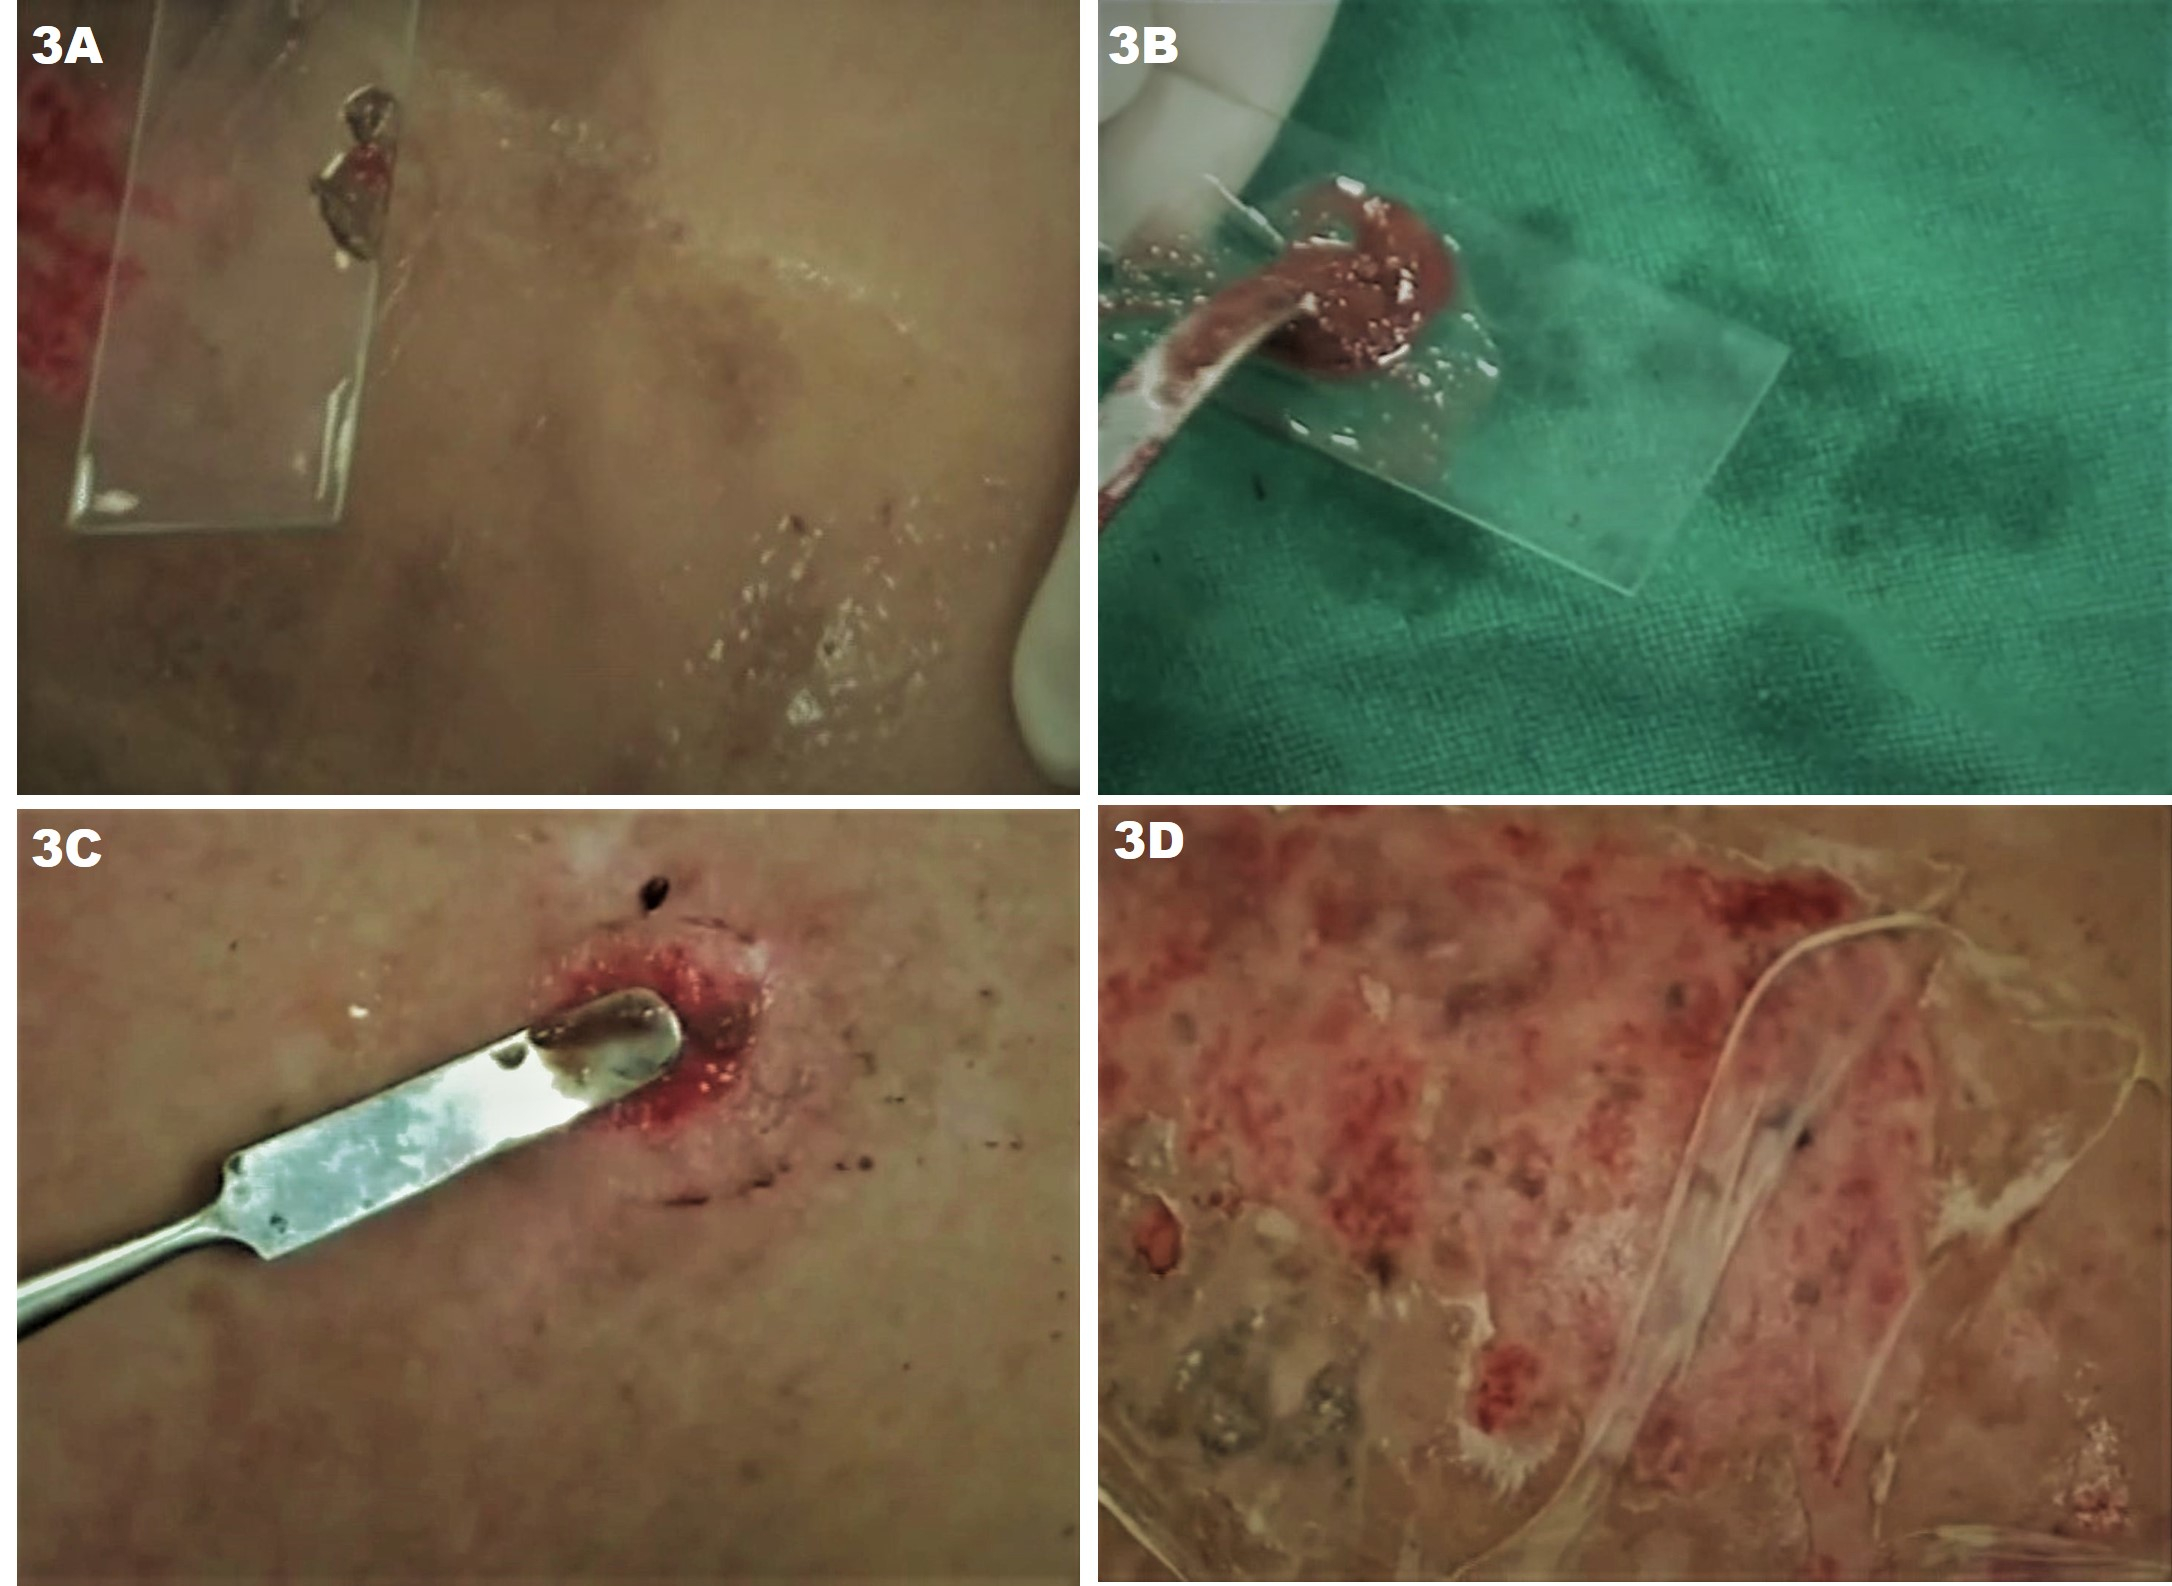 Figure 3. JODHPUR TECHNIQUE (JT) - Depiction of homogenizing the harvested graft and securing it evenly over the dermabraded recipient site. (A) Graft transferred to a slide and mixed with saline to form a homogenous paste; (B) Final material after mixing with saline ready to be grafted; (C) Simple technique of spreading the graft evenly; and (D) Collagen dressing placed over the recipient area after ensuring even and complete application of the graft-paste.